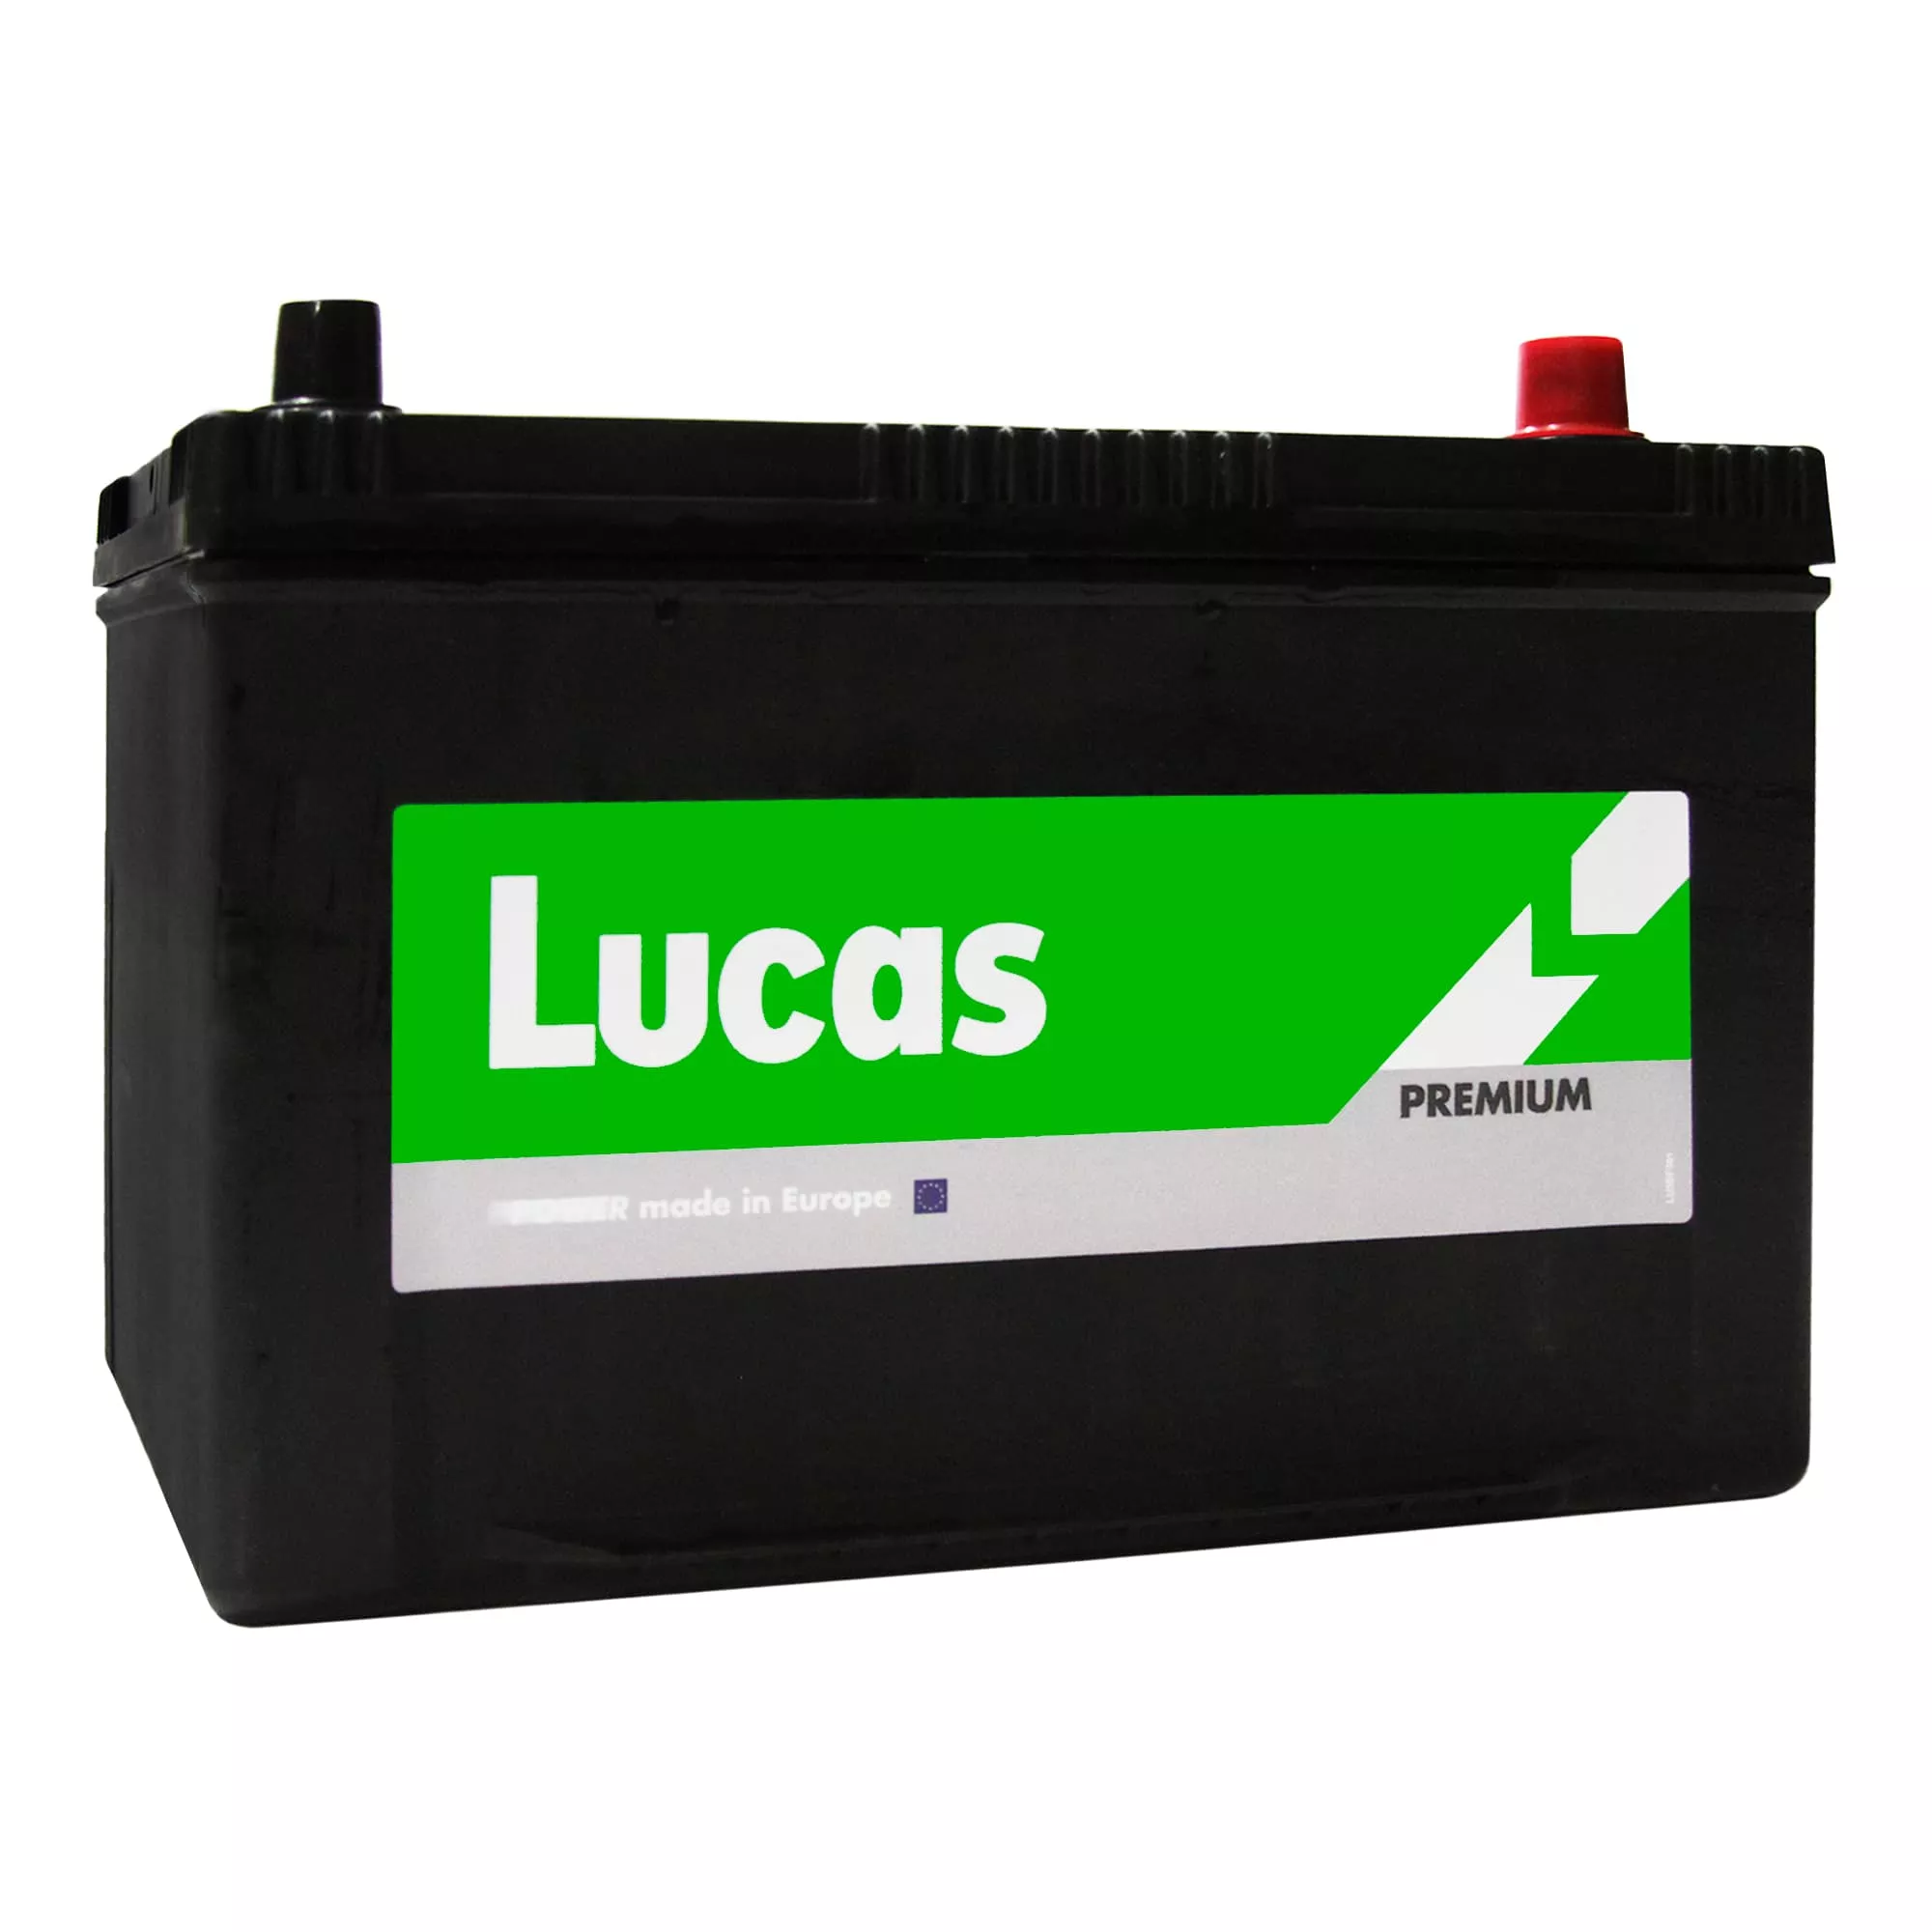 Аккумулятор Lucas (Batteries manufactured by Exide in Spain) 6CT-95 АзЕ Asia (LBPA954)